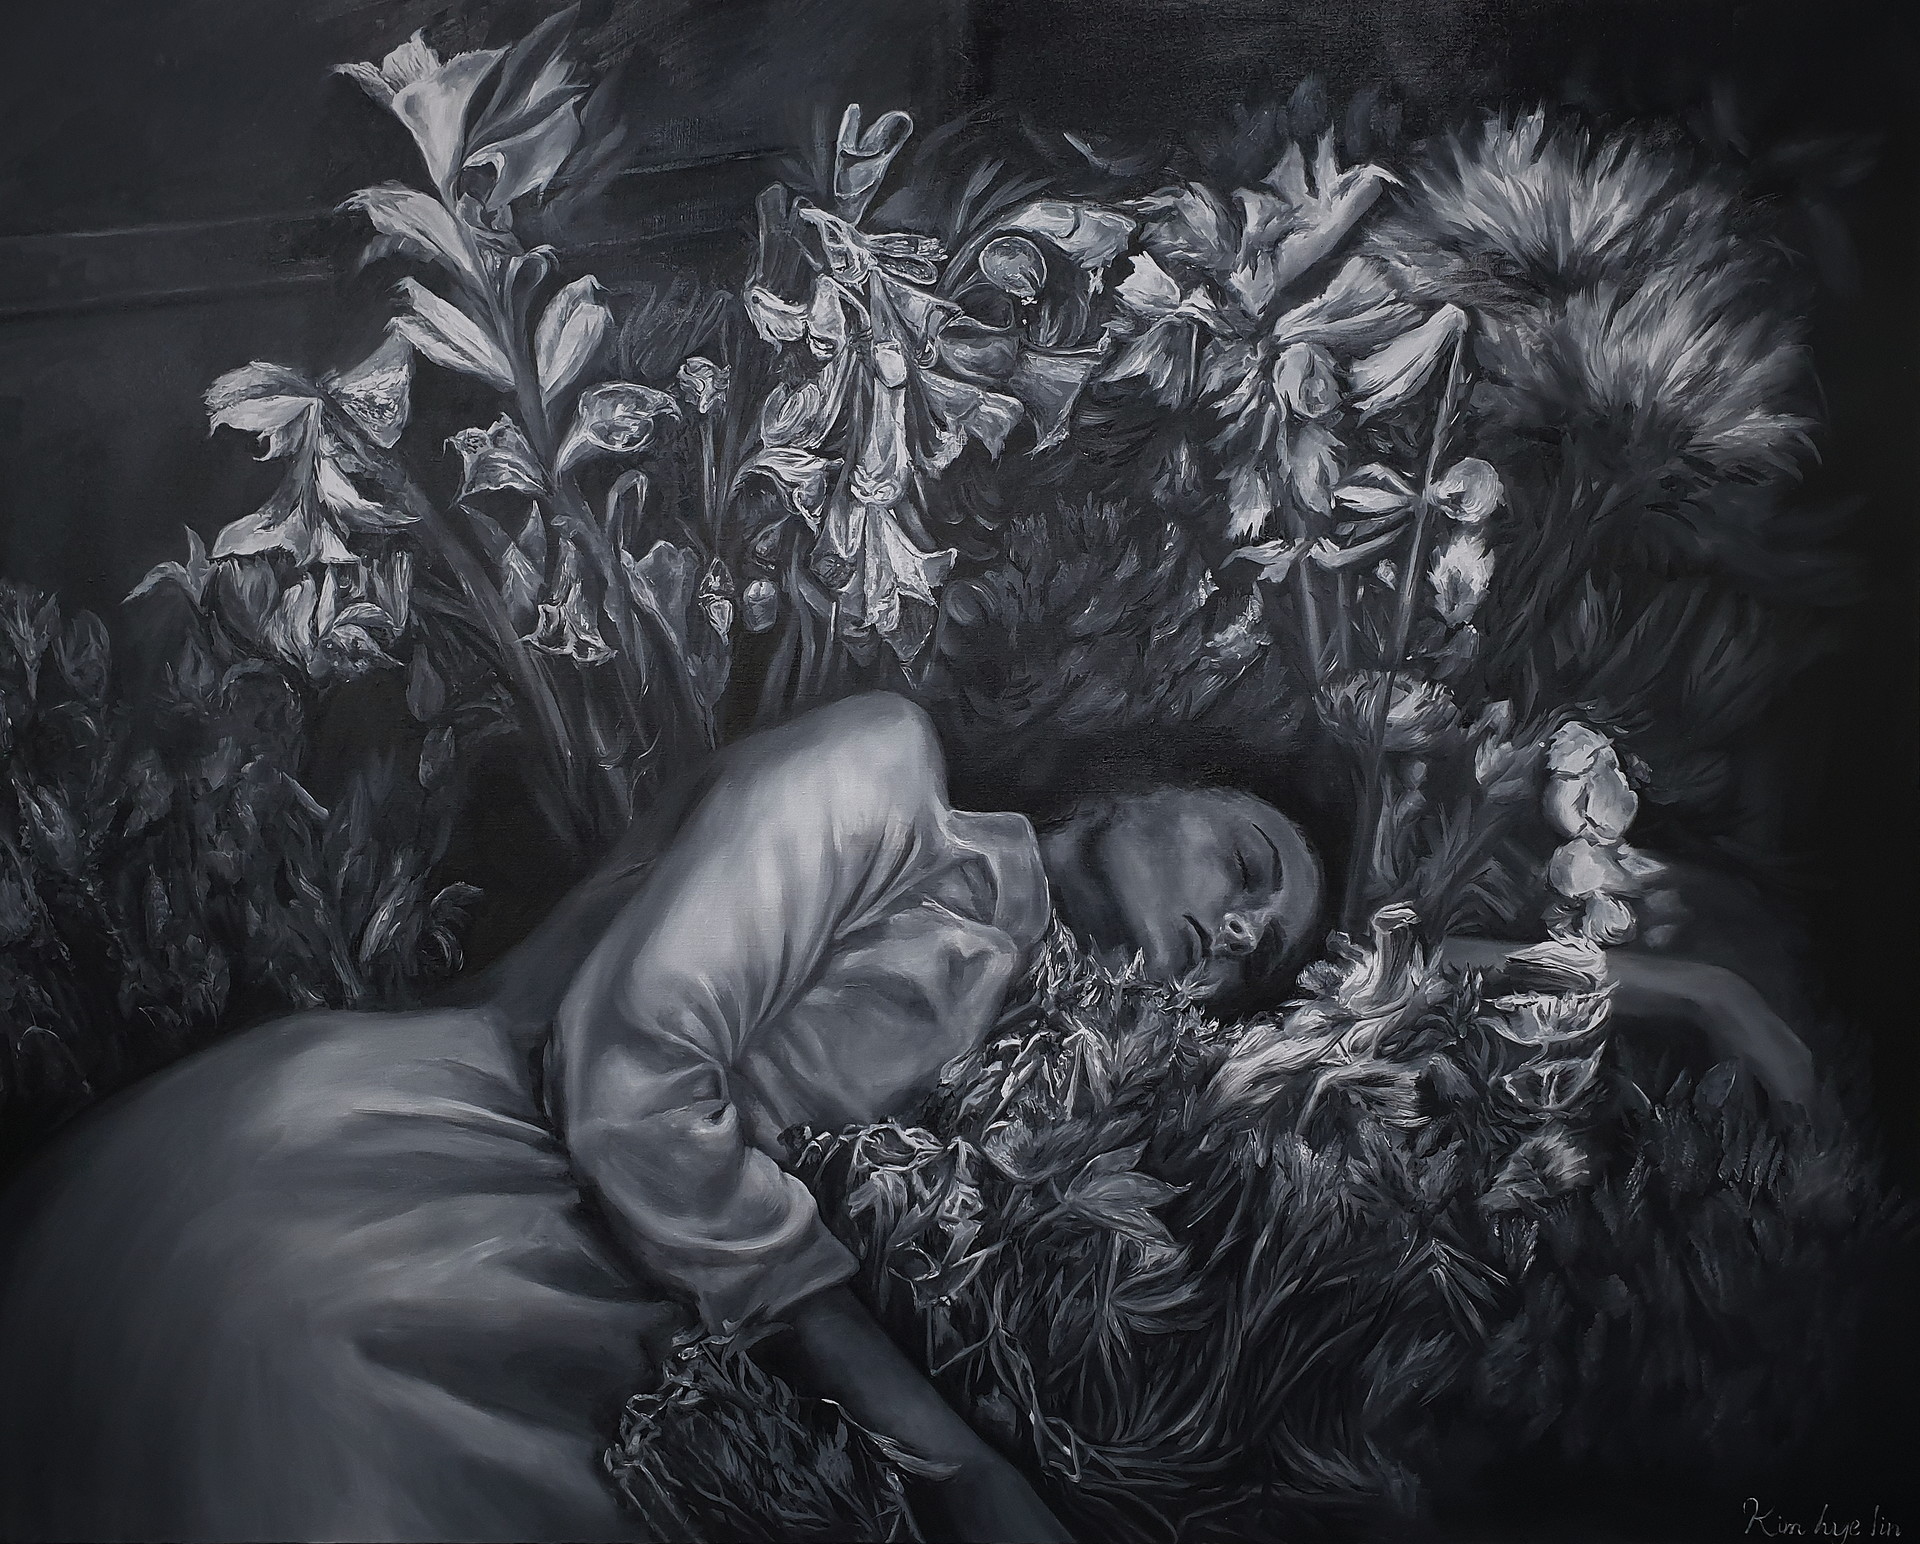 Colorless, 130.3×162.2cm, oil on canvas, 2019